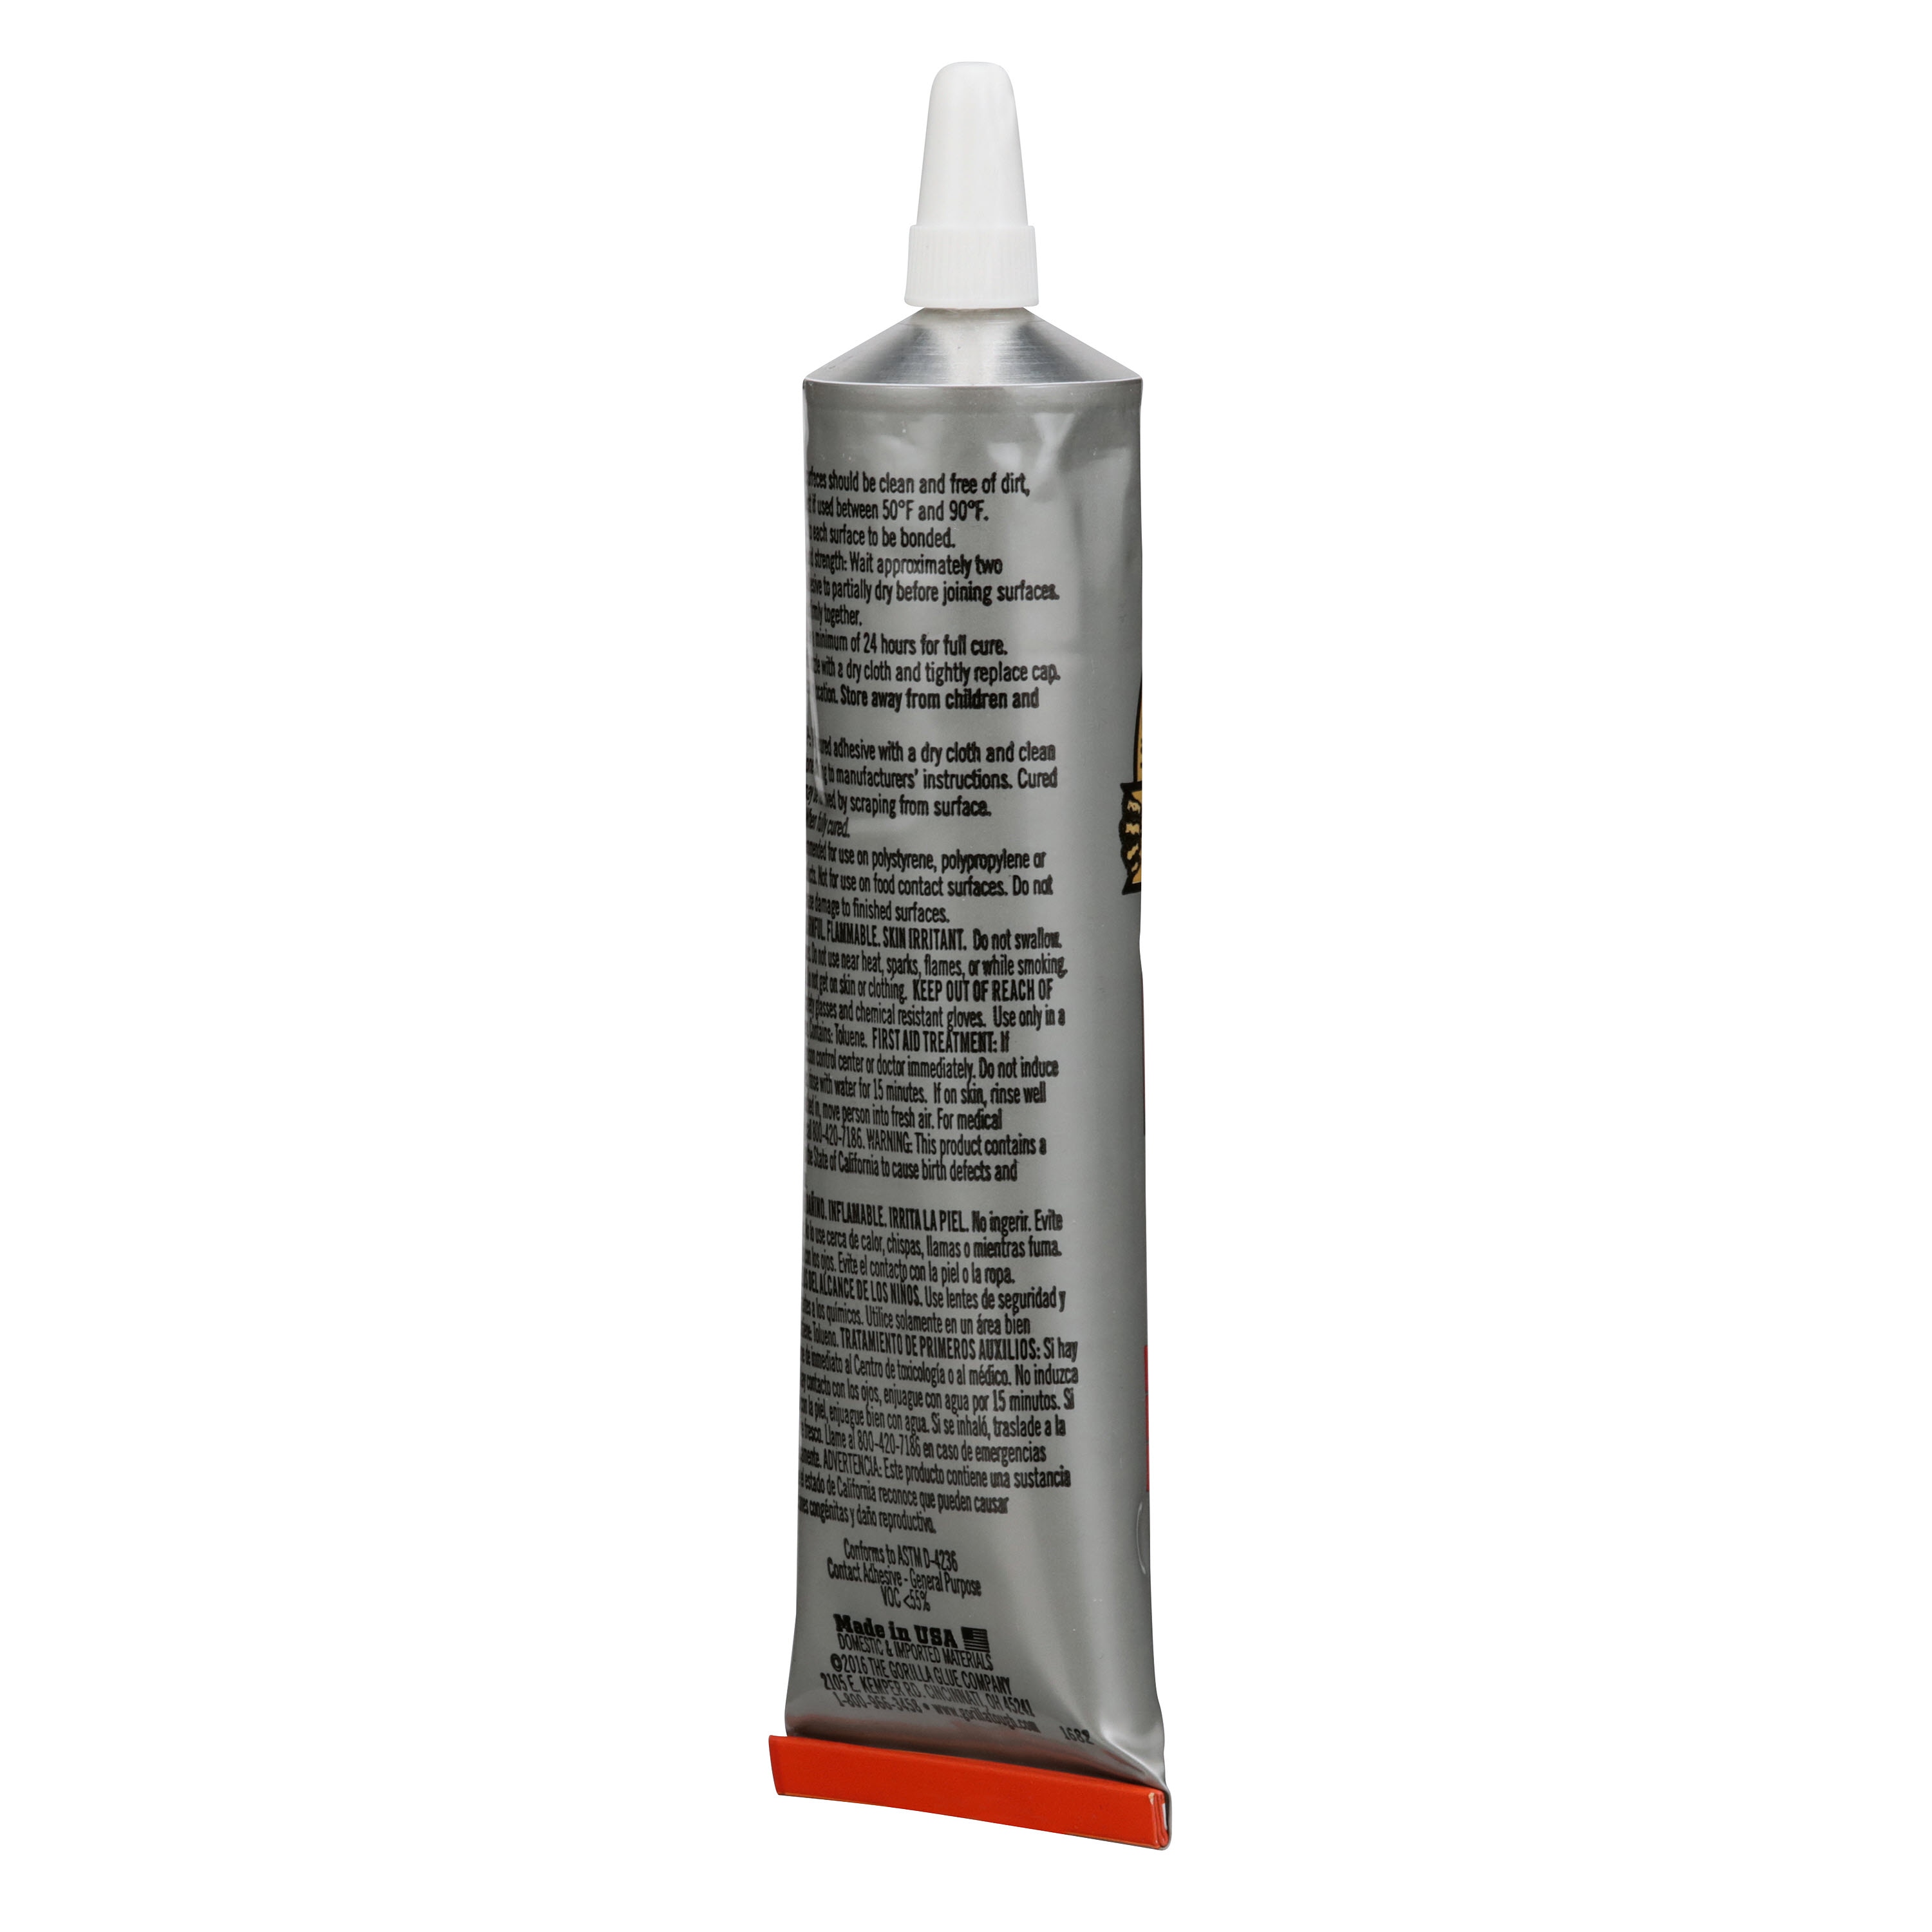 The Gorilla Glue Company - Gorilla Fabric Glue provides a fast setting,  permanent bond that remains flexible after washing. This high strength  adhesive dries crystal clear and can be used on a